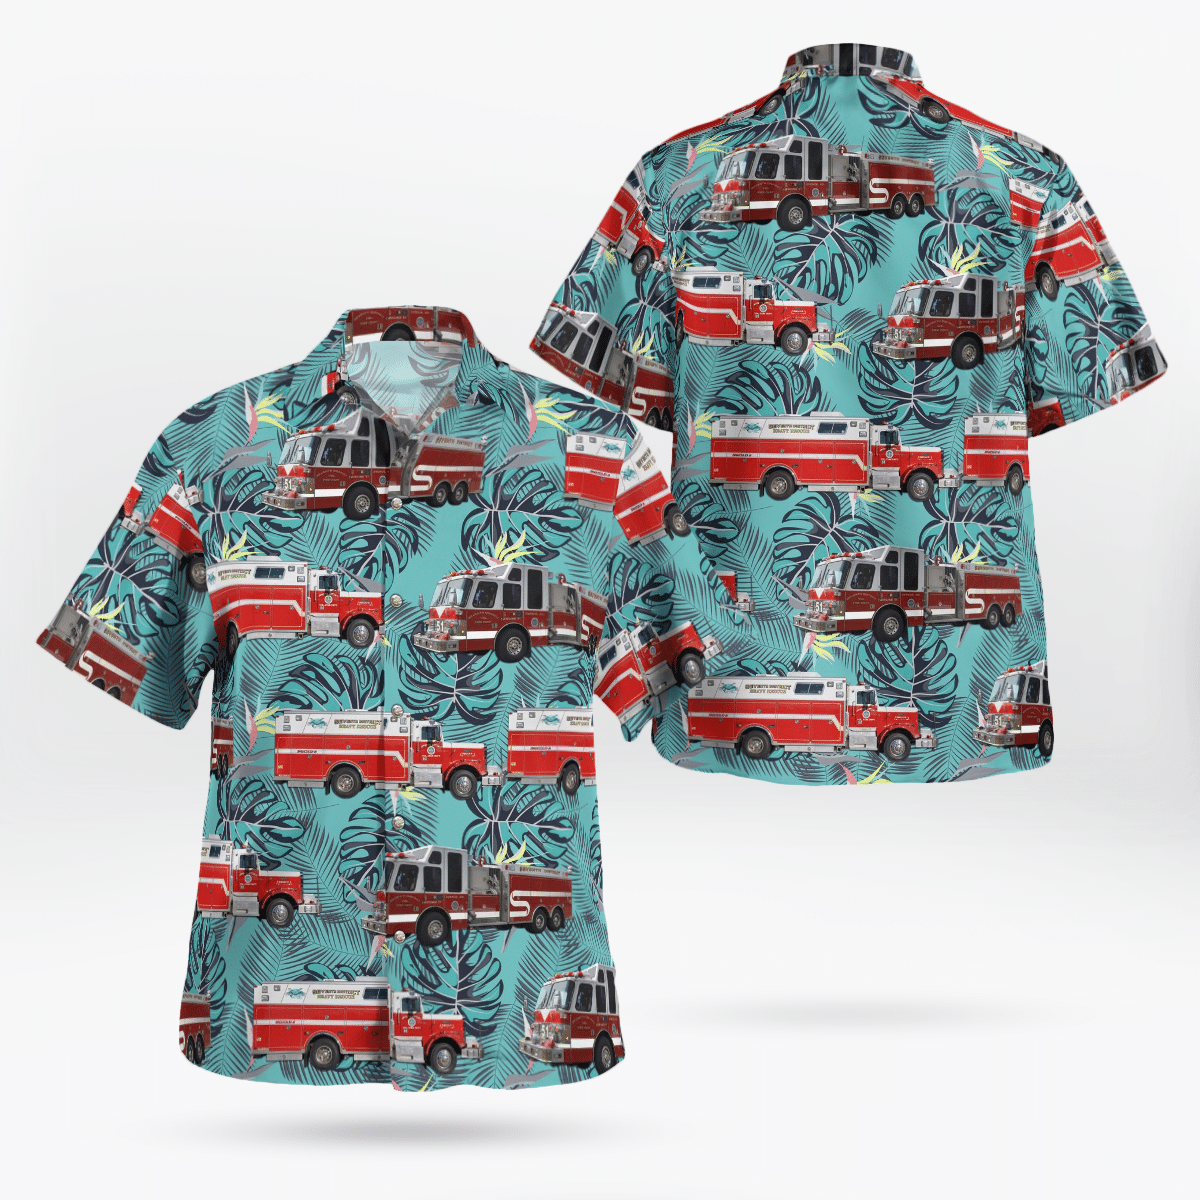 If you want to be noticed, wear These Trendy Hawaiian Shirt 79